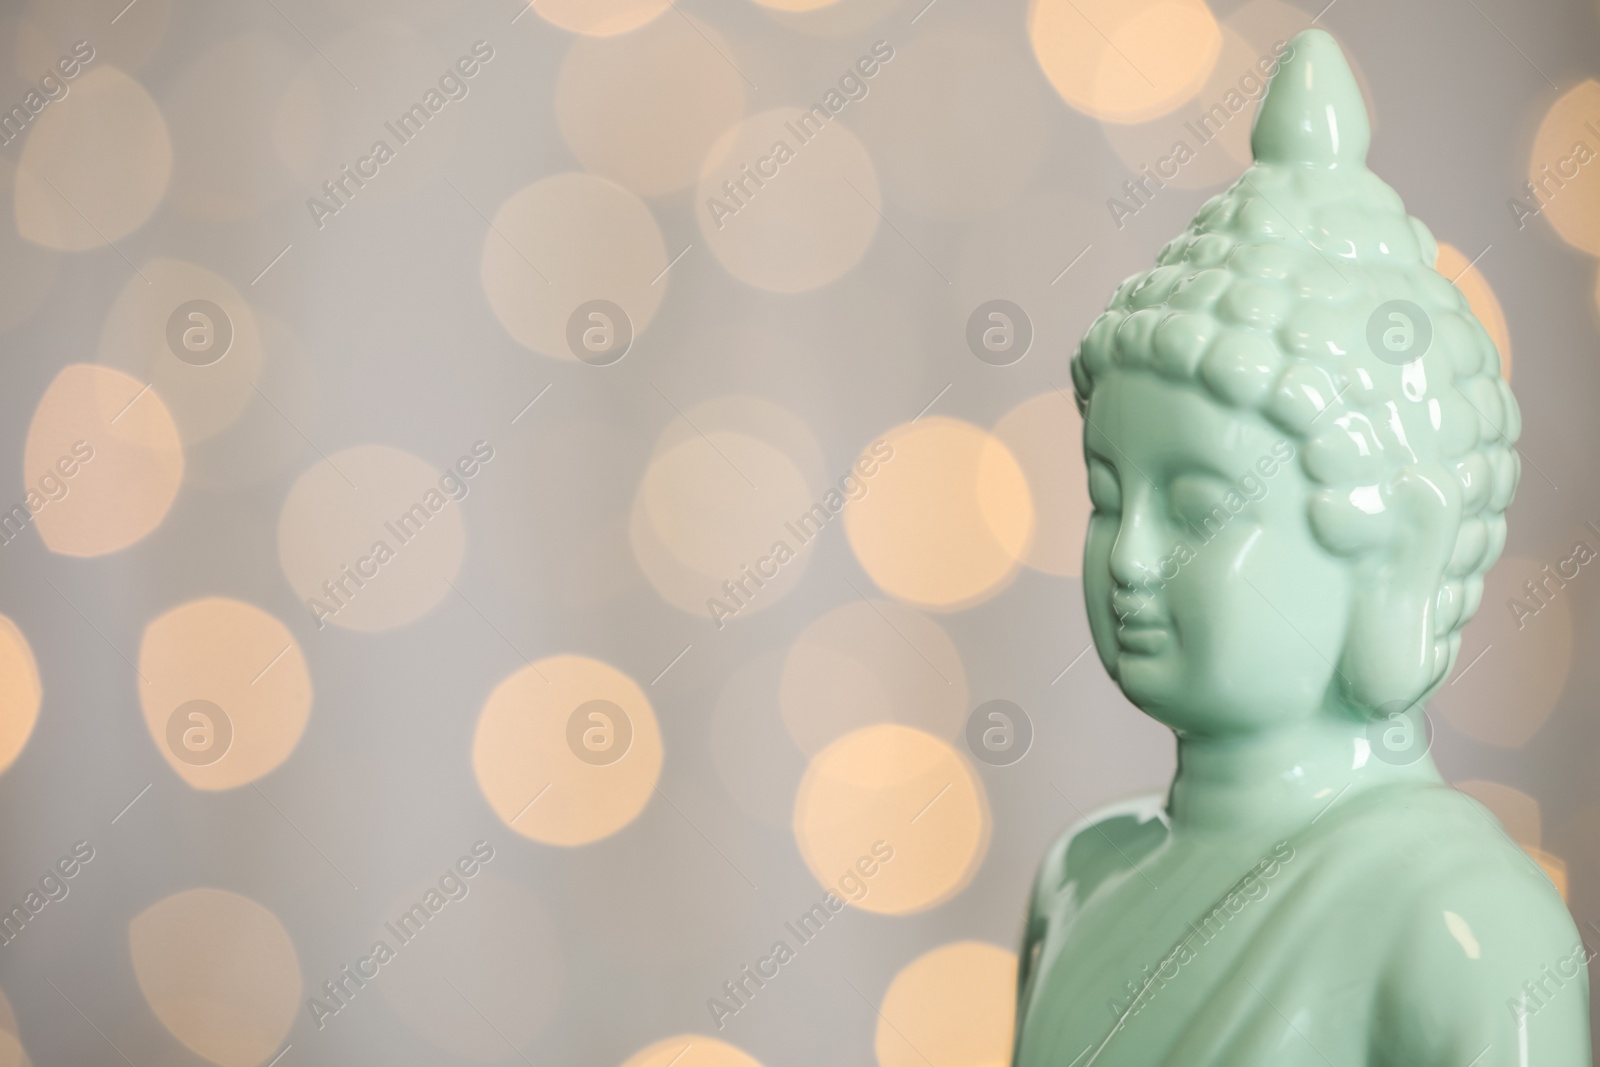 Photo of Buddha statue against blurred lights, closeup. Space for text